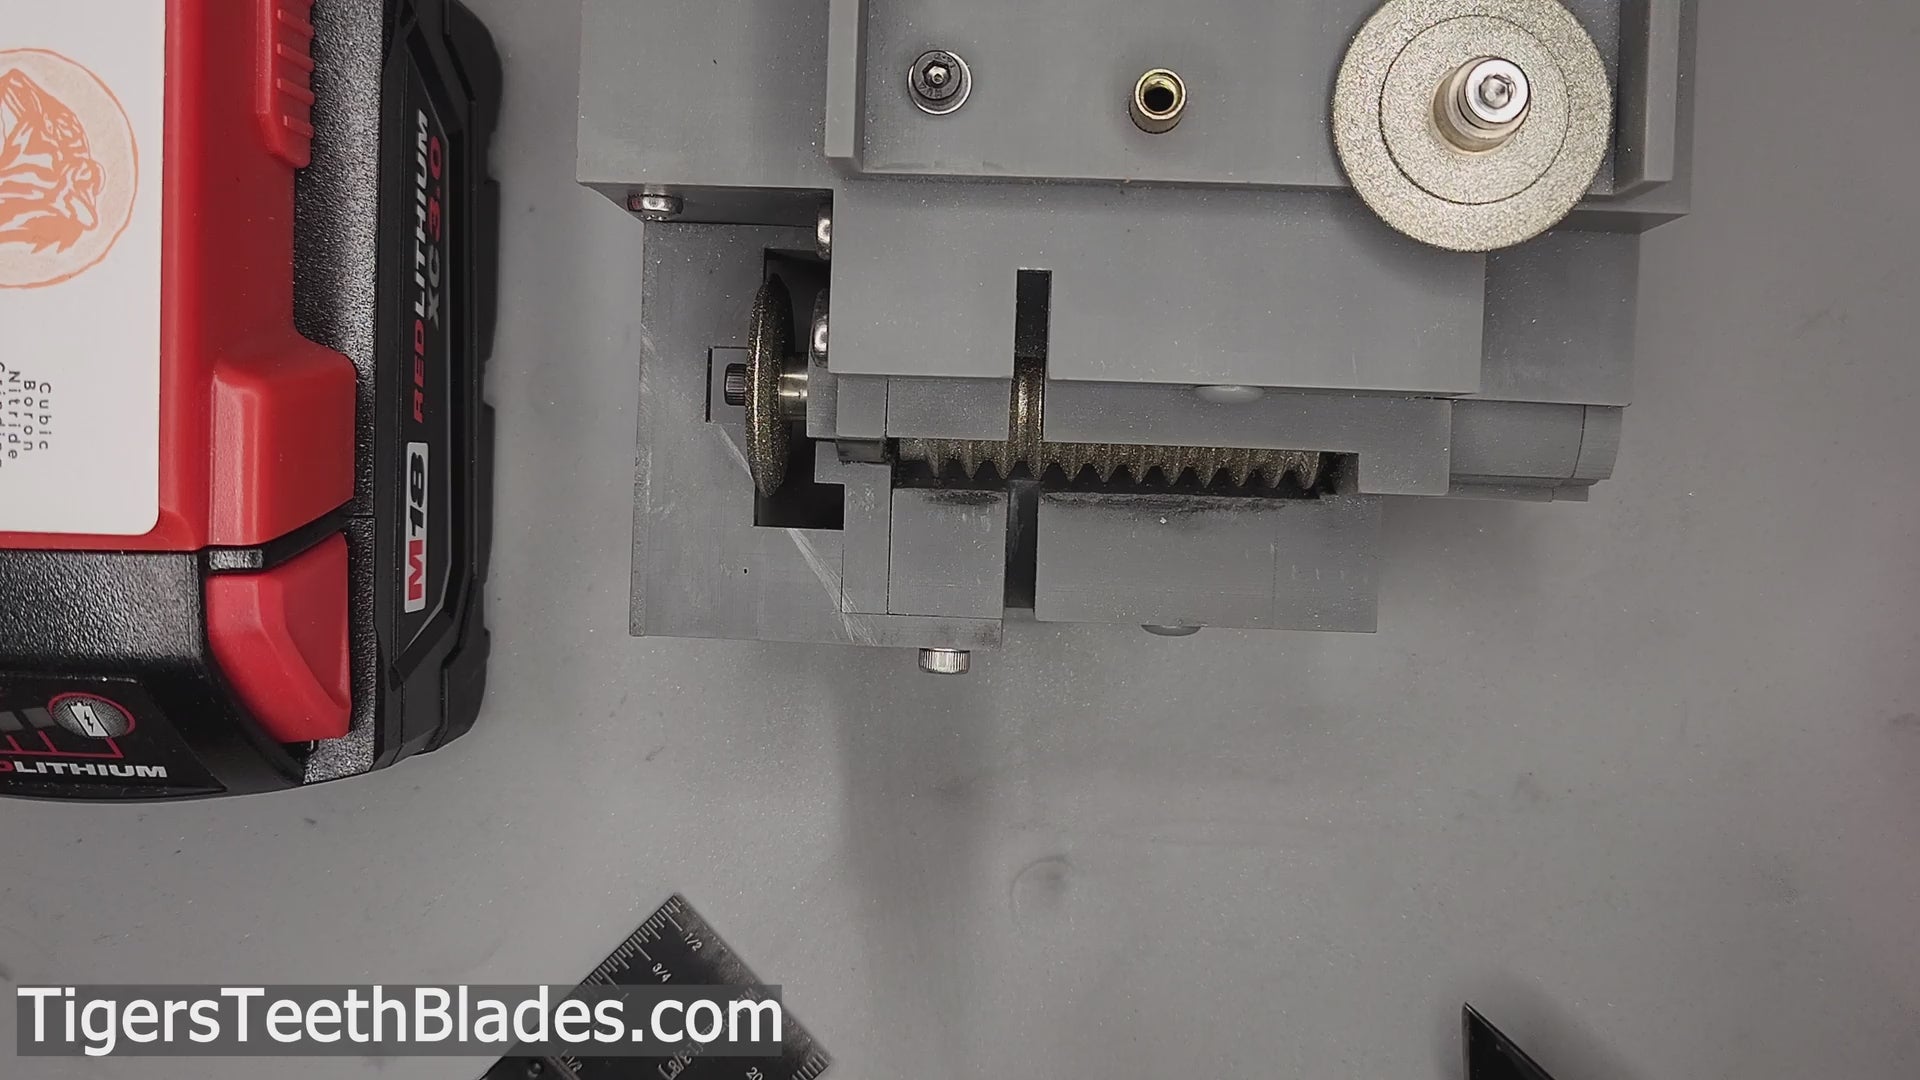 Load video: How to use the Tigers Teeth Blade Sharpener